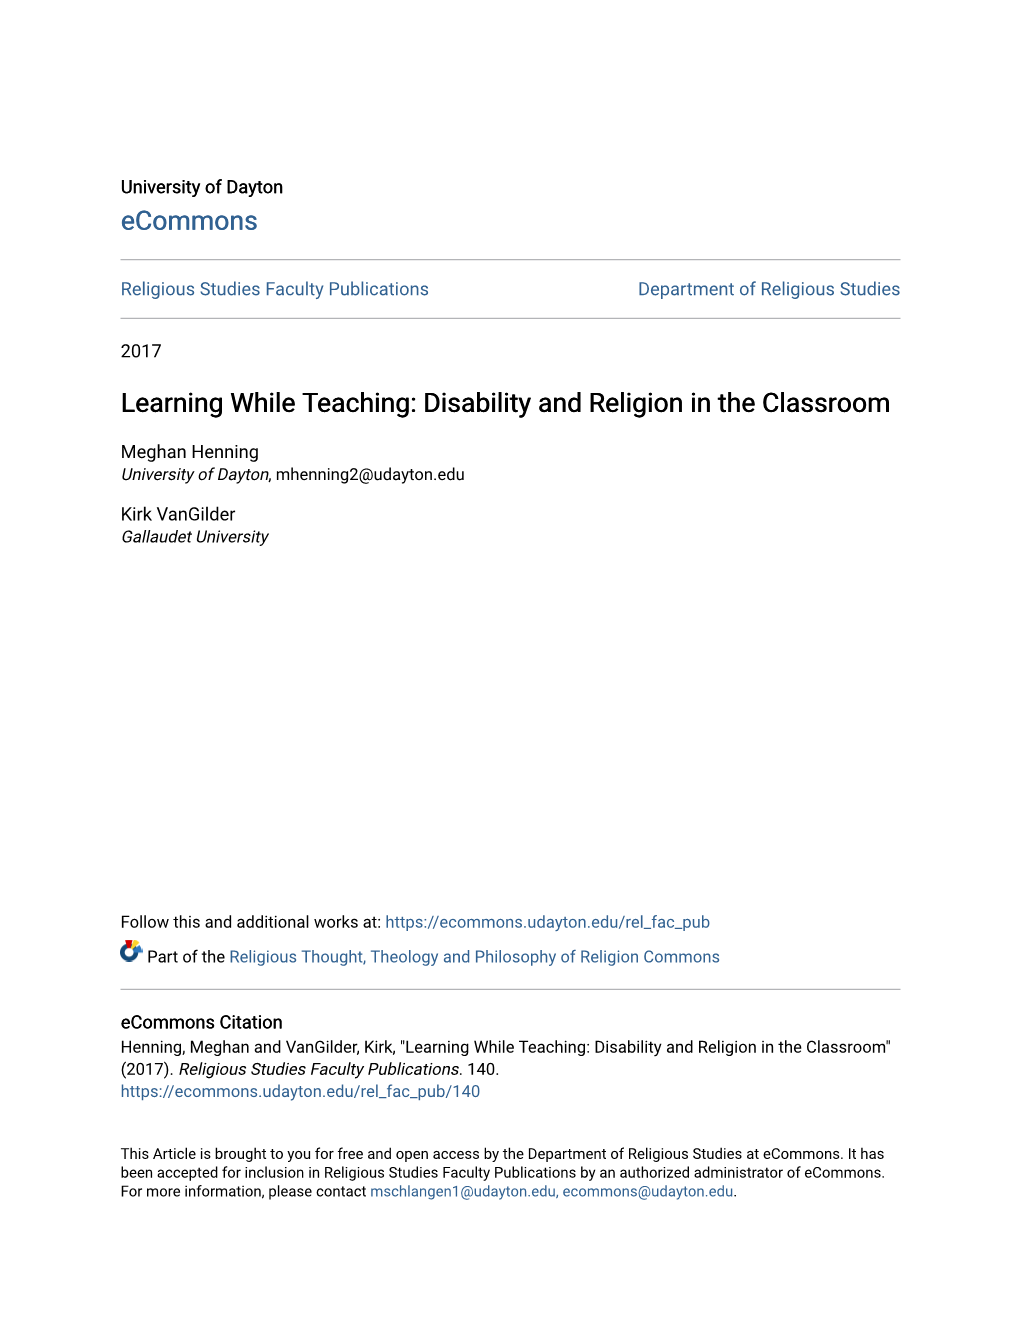 Learning While Teaching: Disability and Religion in the Classroom